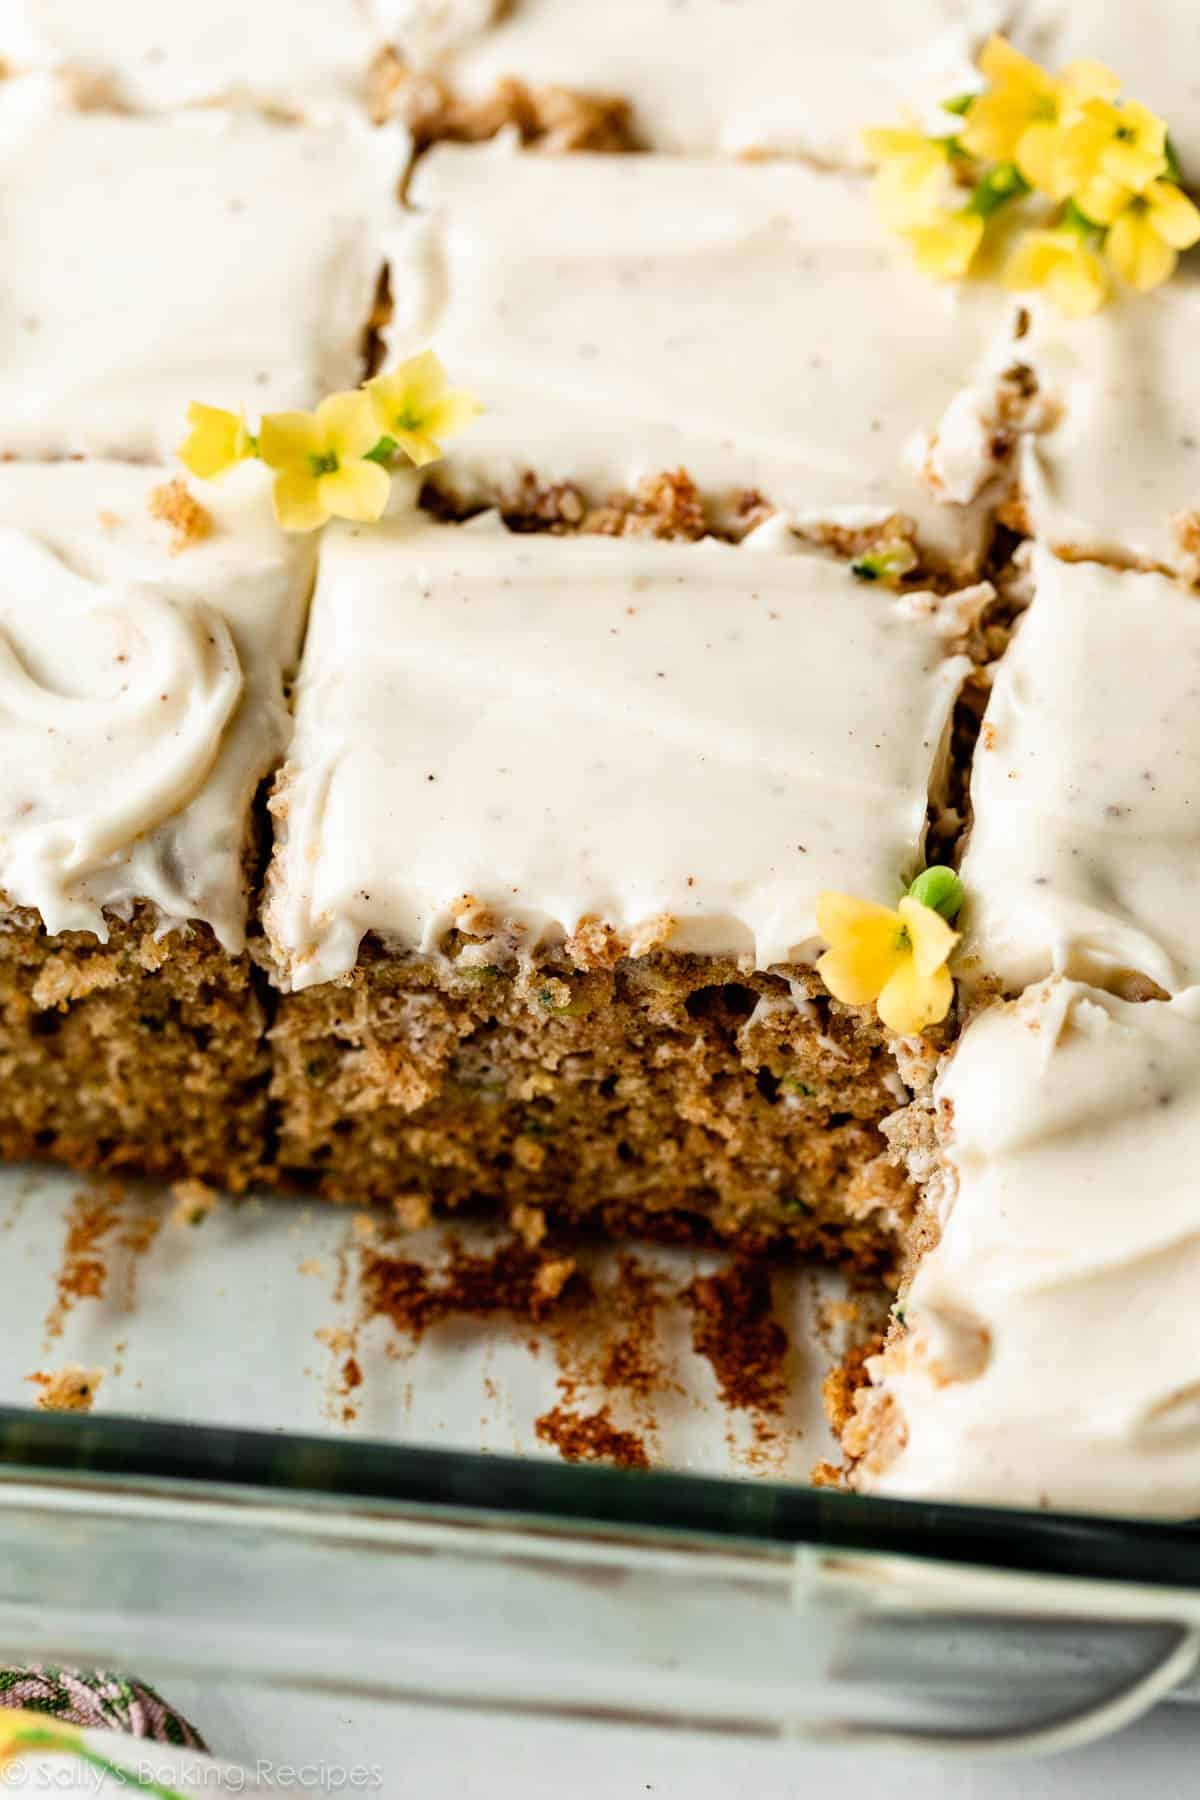 zucchini sheet cake in glass cake pan with yellow flowers as garnish on top.